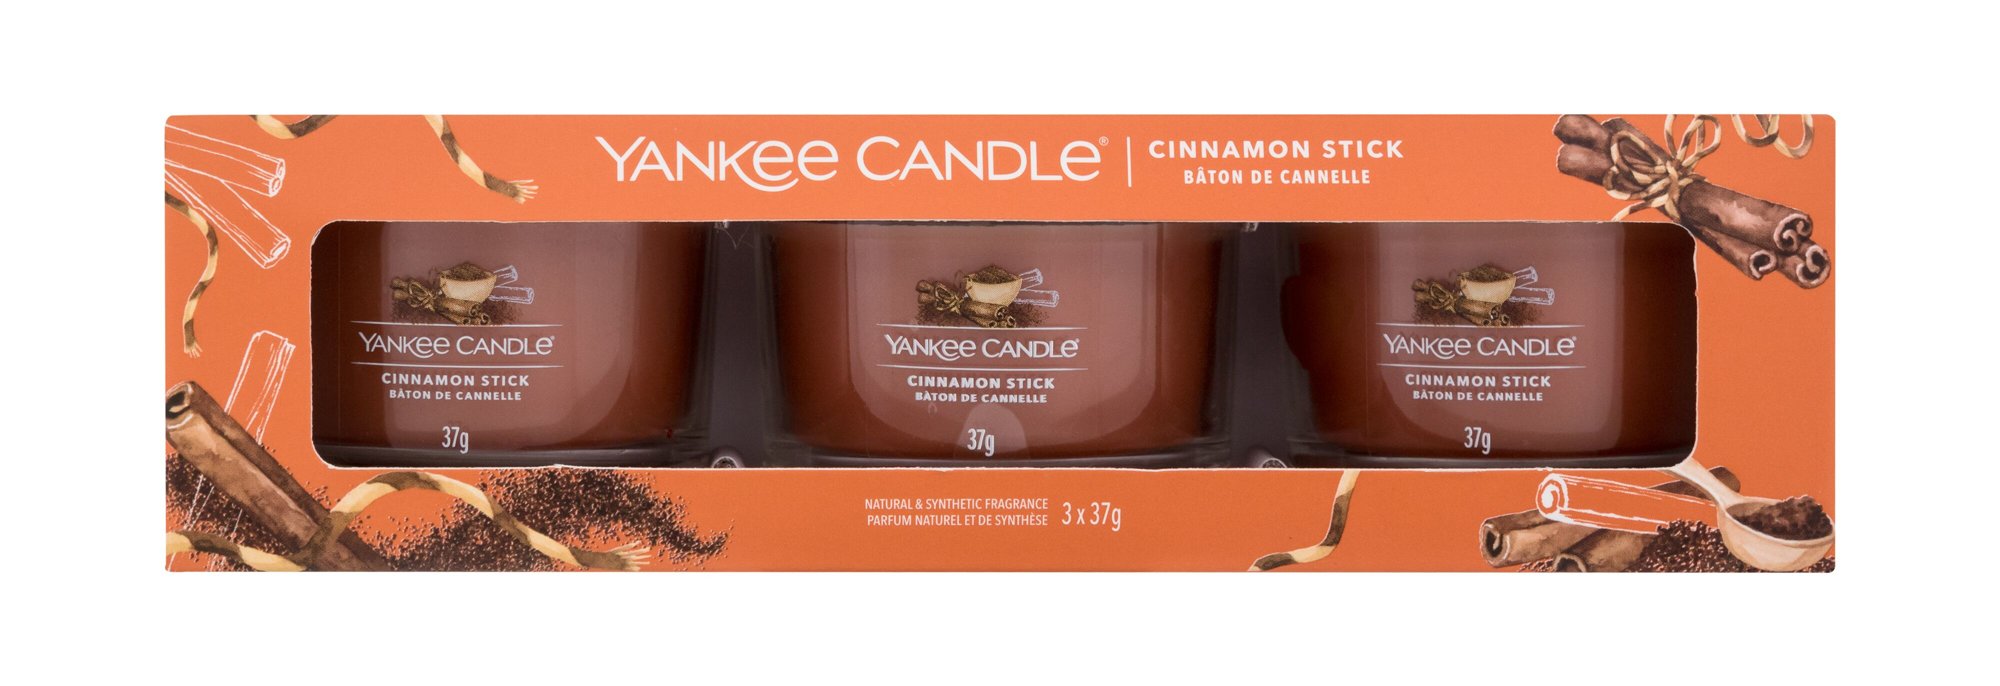 Yankee Candle Cinnamon Stick 37g Scented Candle 3 x 37 g Kvepalai Unisex Scented Candle Rinkinys (Pažeista pakuotė)